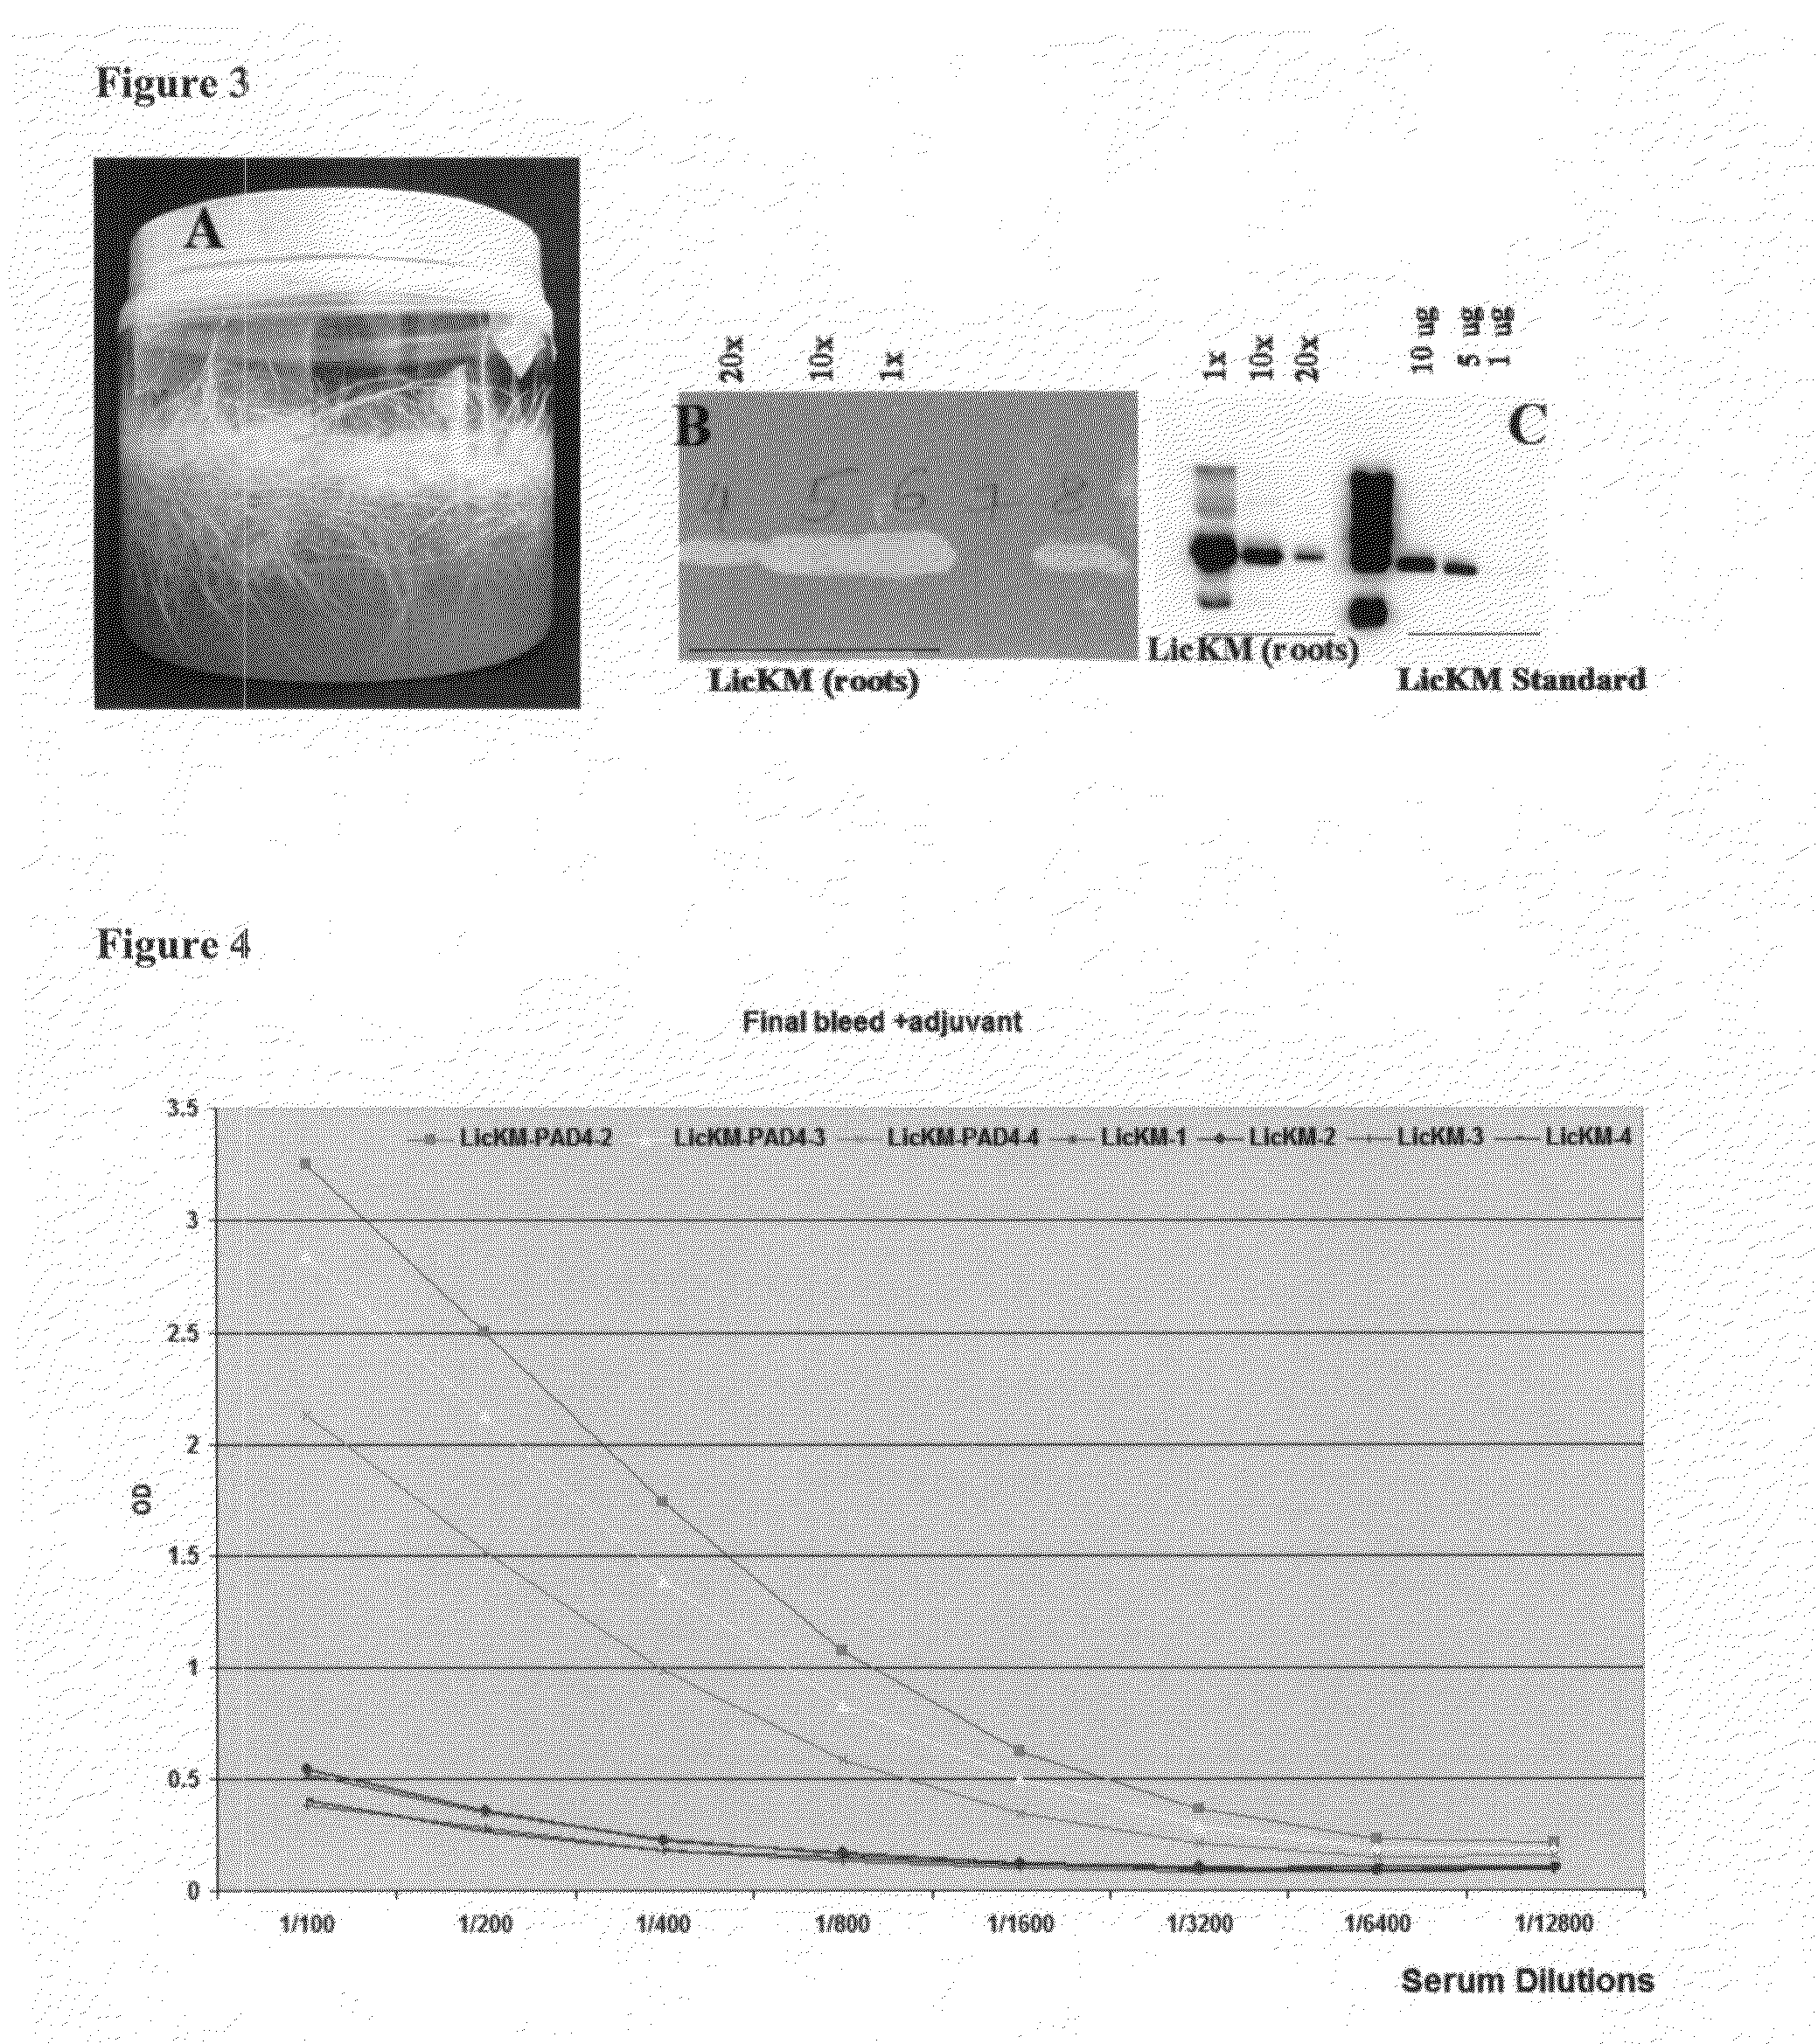 Bacillus anthracis antigens, vaccine compositions, and related methods